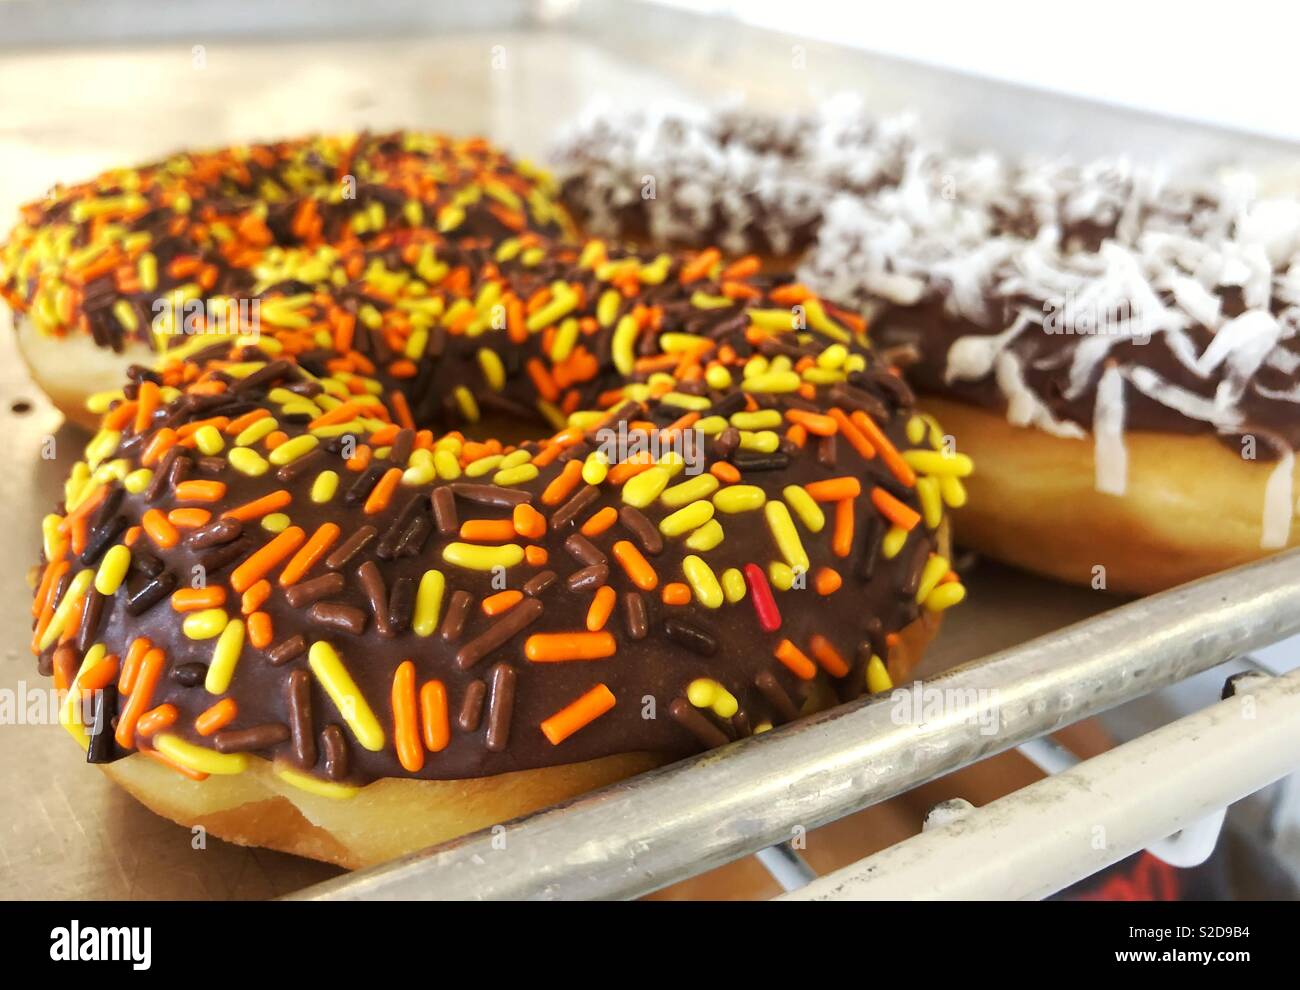 Halloween sprinkles and shaved coconut on doughnuts at a bakery in Bayou La Batre, Alabama (Photo by Carmen K. Sisson/Cloudybright) Stock Photo